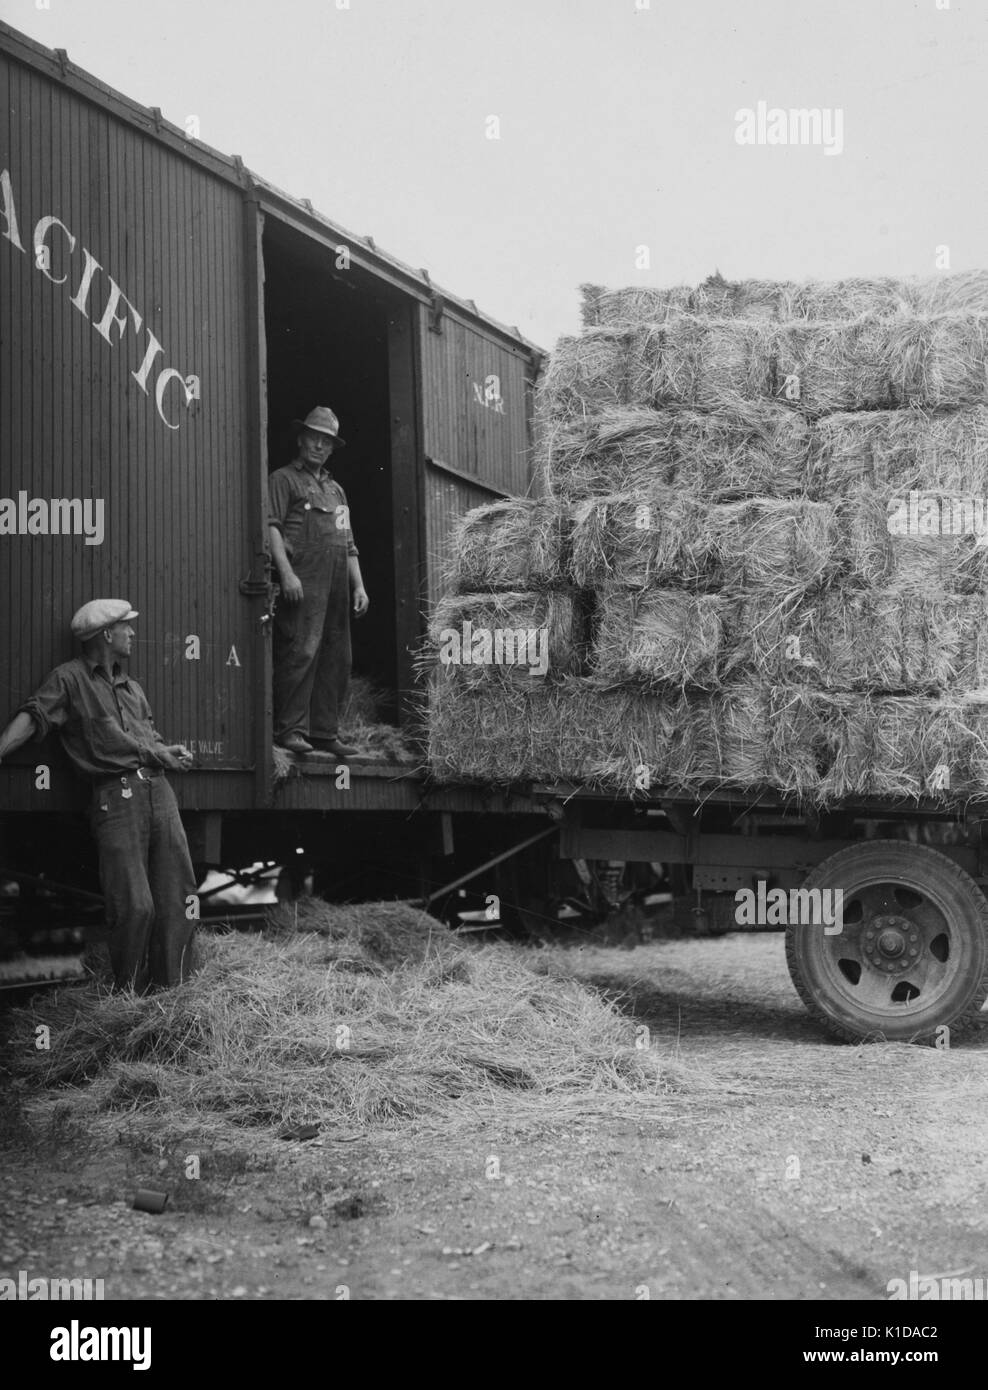 Two men unloading bales of hay into a train car, Dickinson, North Dakota, 1936. From the New York Public Library. Stock Photo